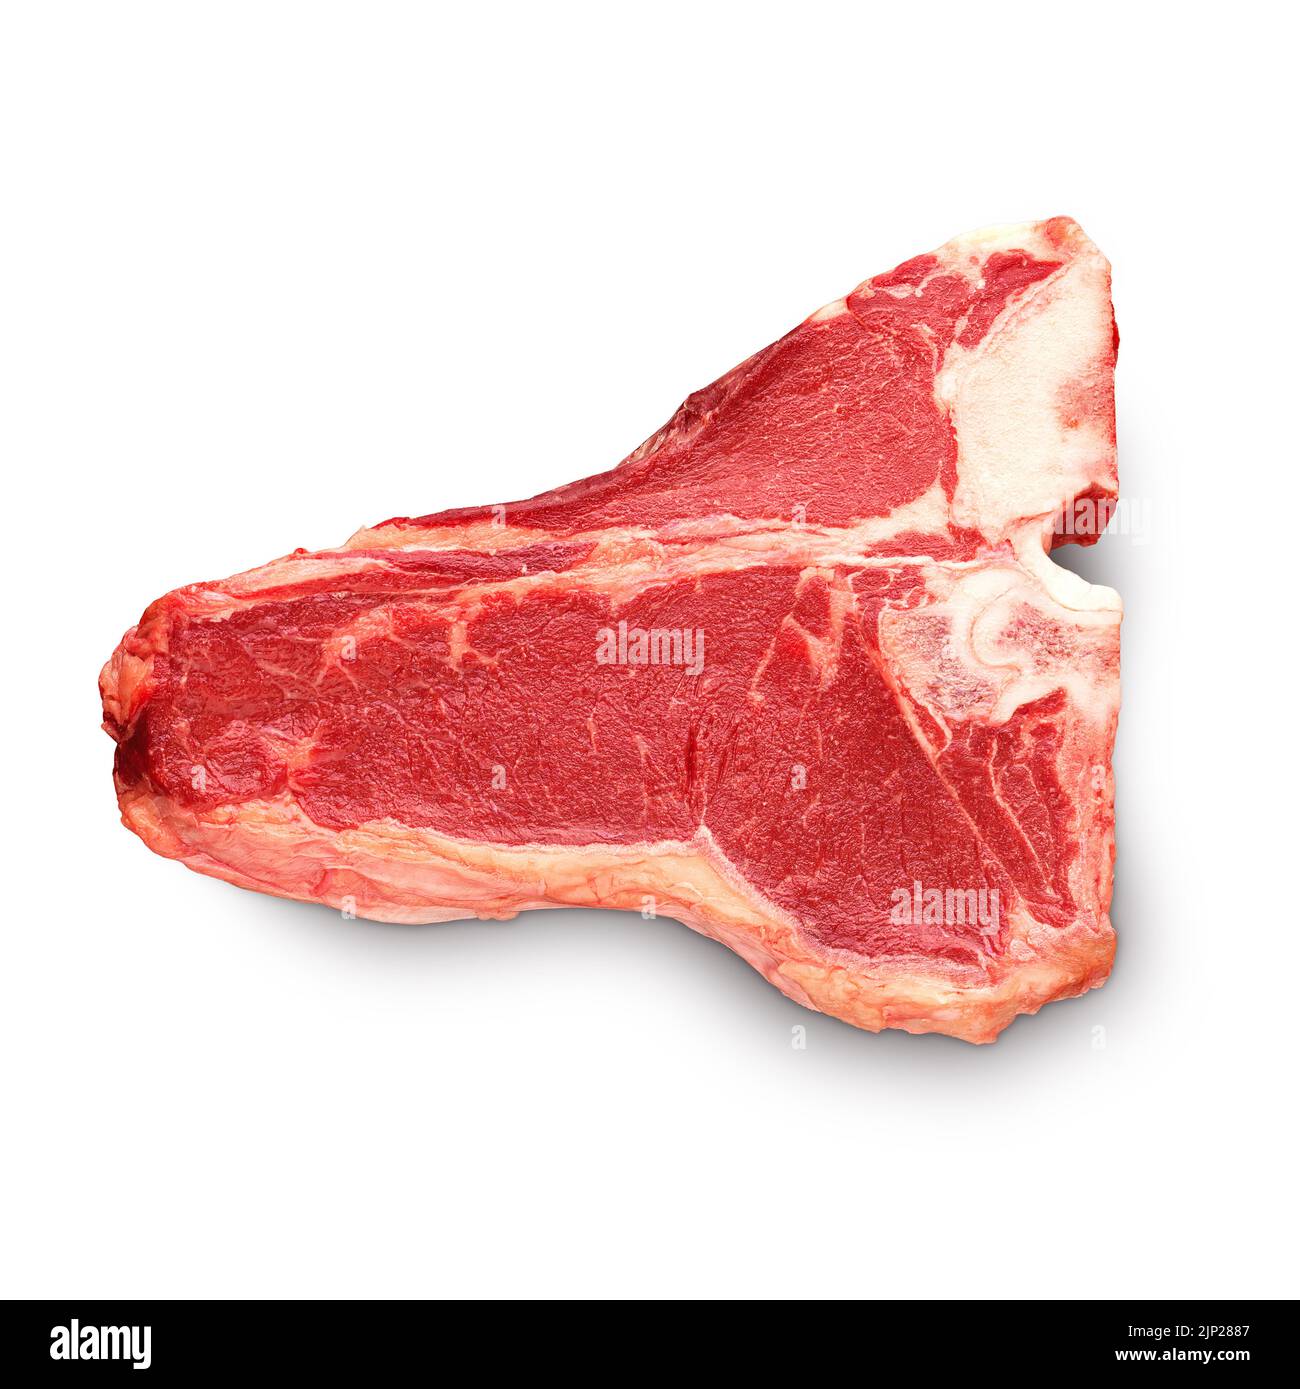 Raw Porterhouse or T-bone beef meat steak isolated on white background. Top view. Deep focus Stock Photo